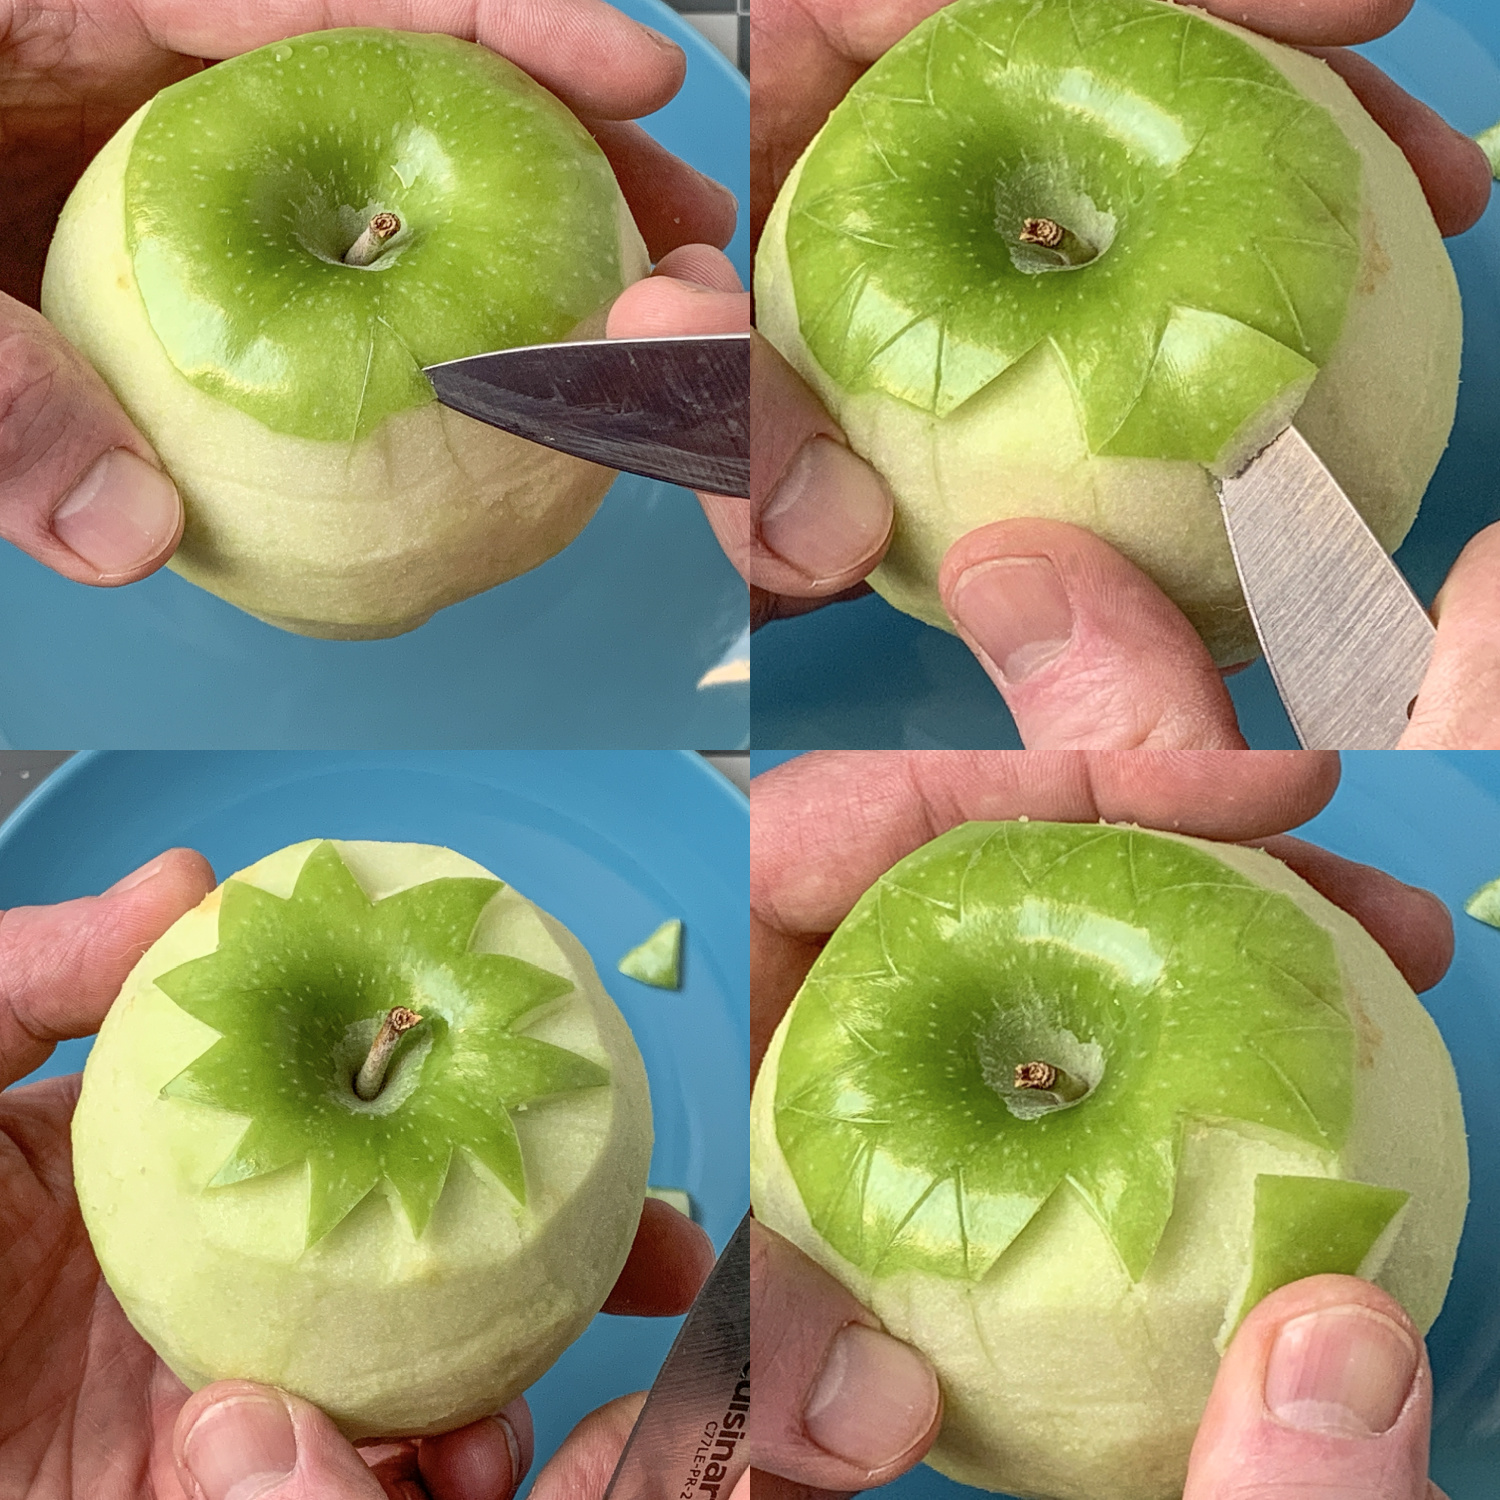 Cutting hair shapes with a knife on top of an apple